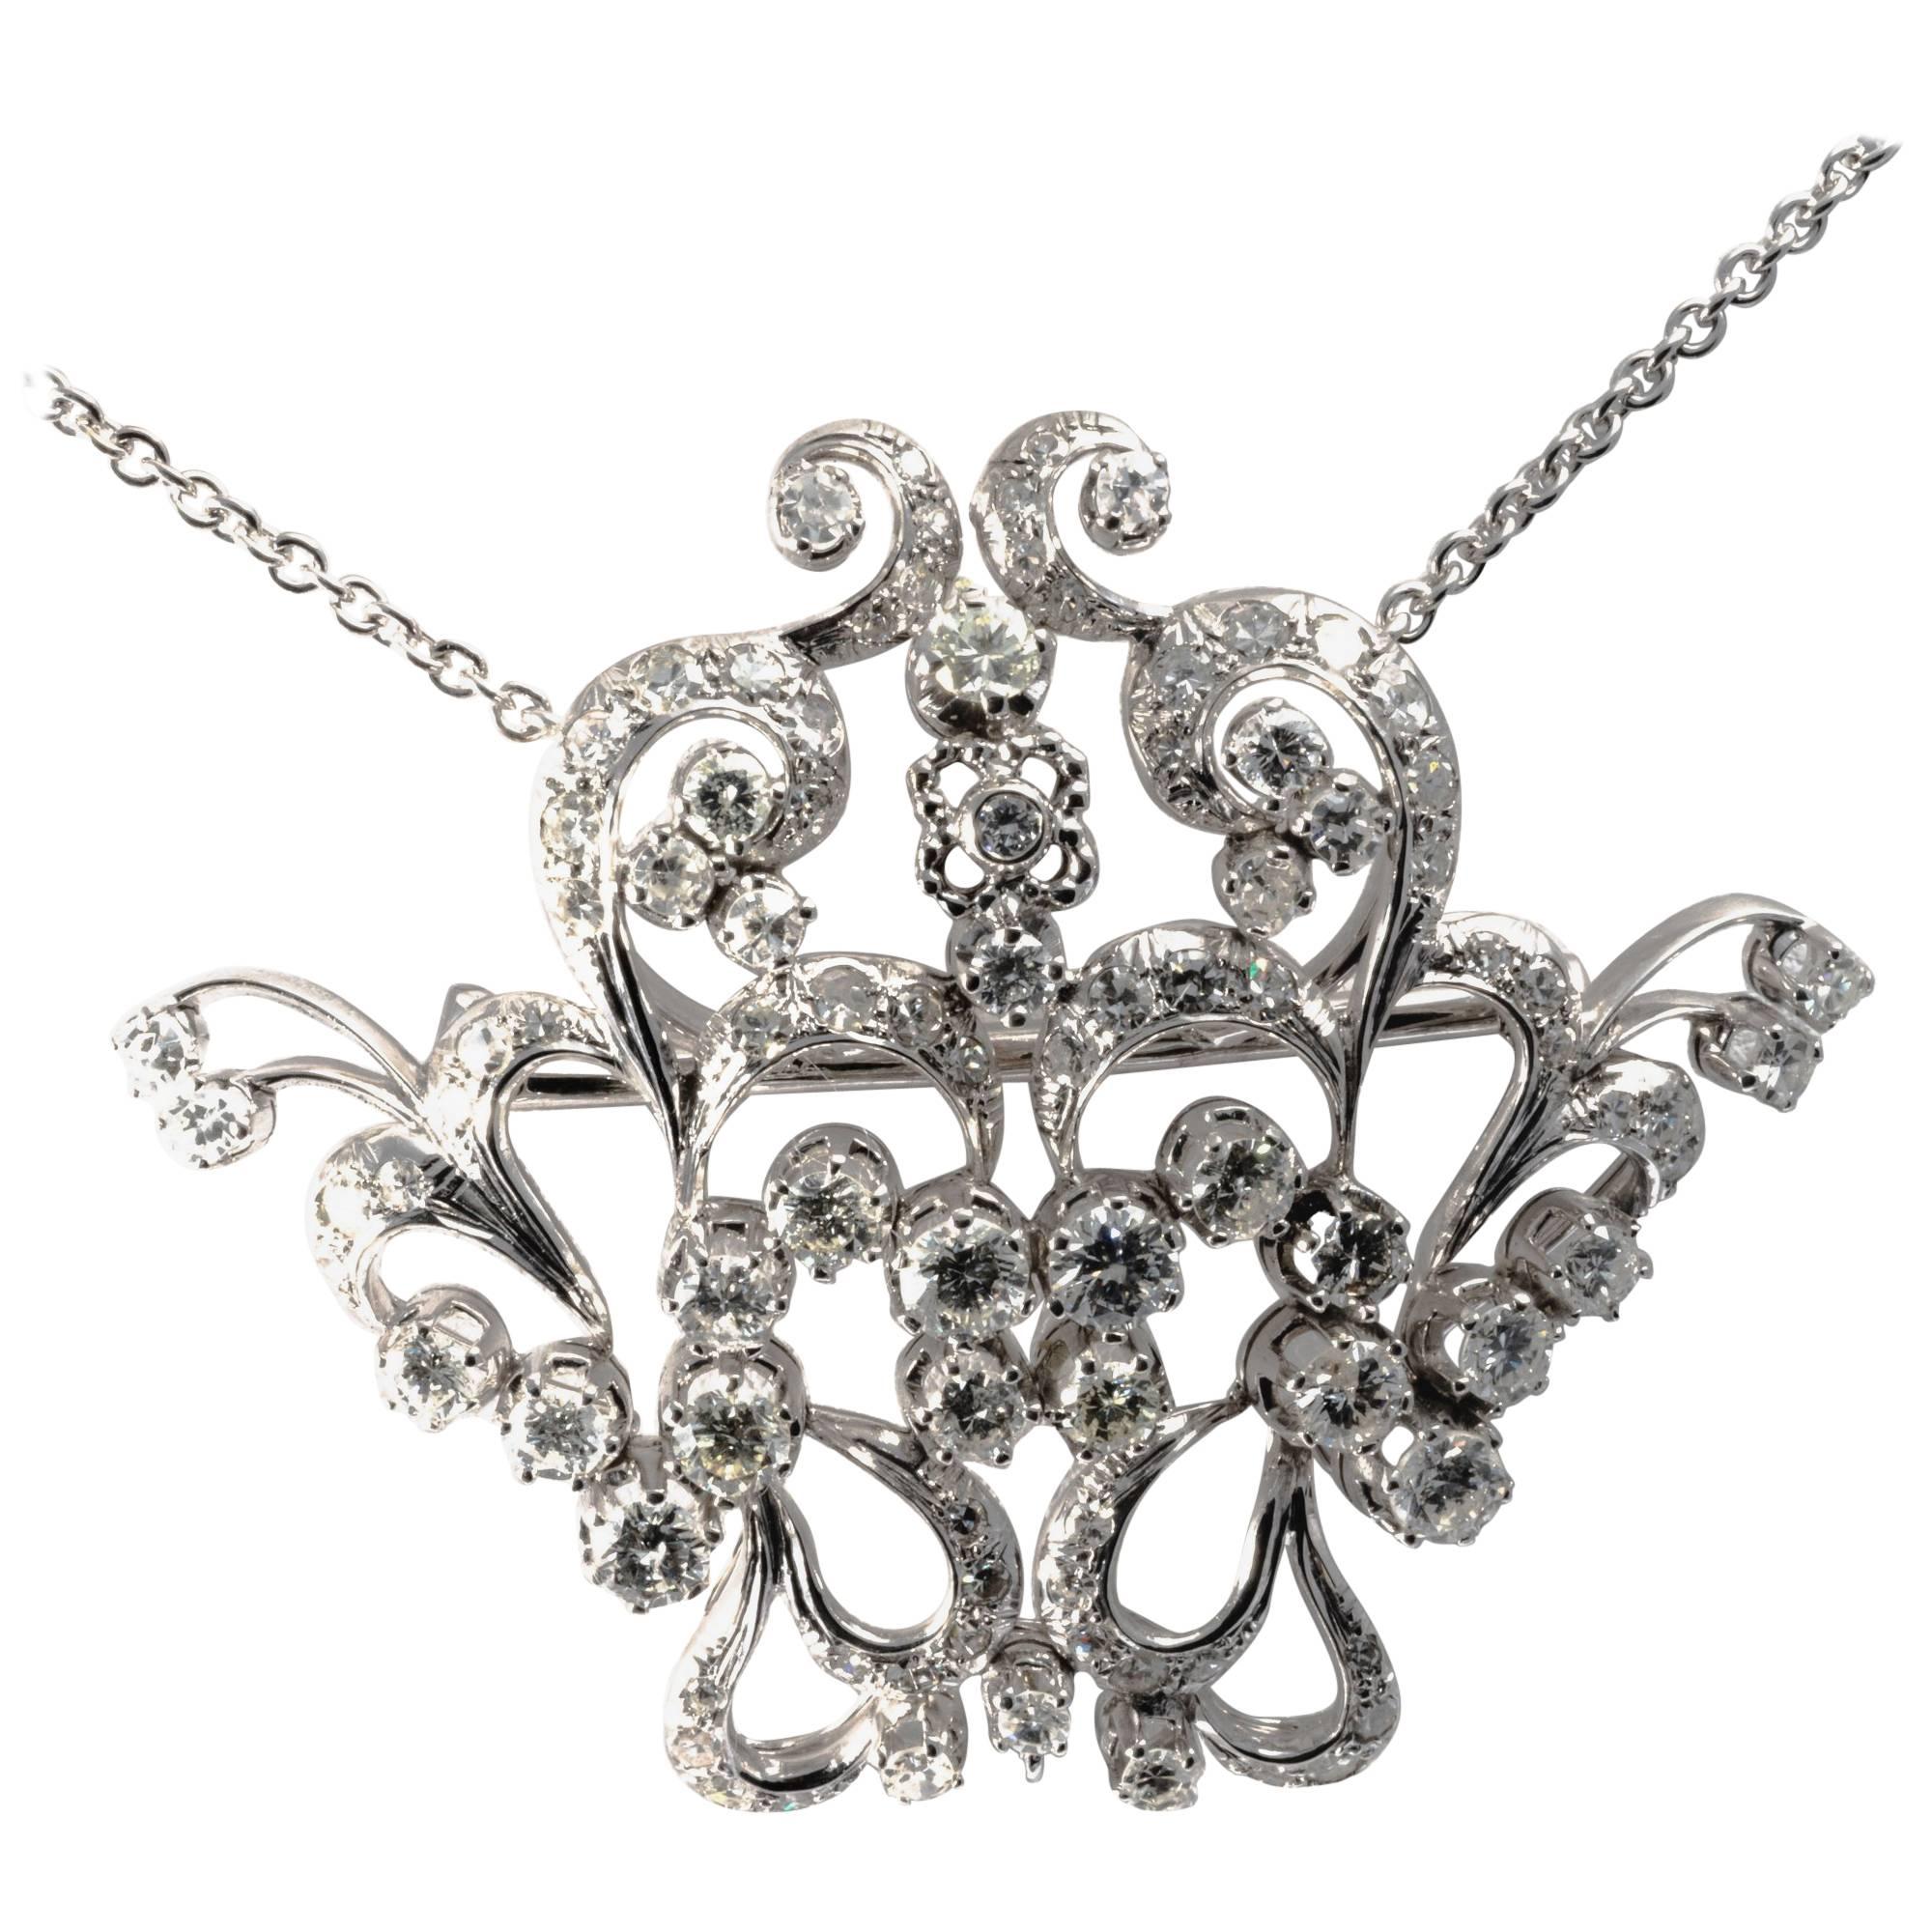 18K Midcentury Vintage Garland Intricated Open Work Diamond Necklace and Brooch For Sale